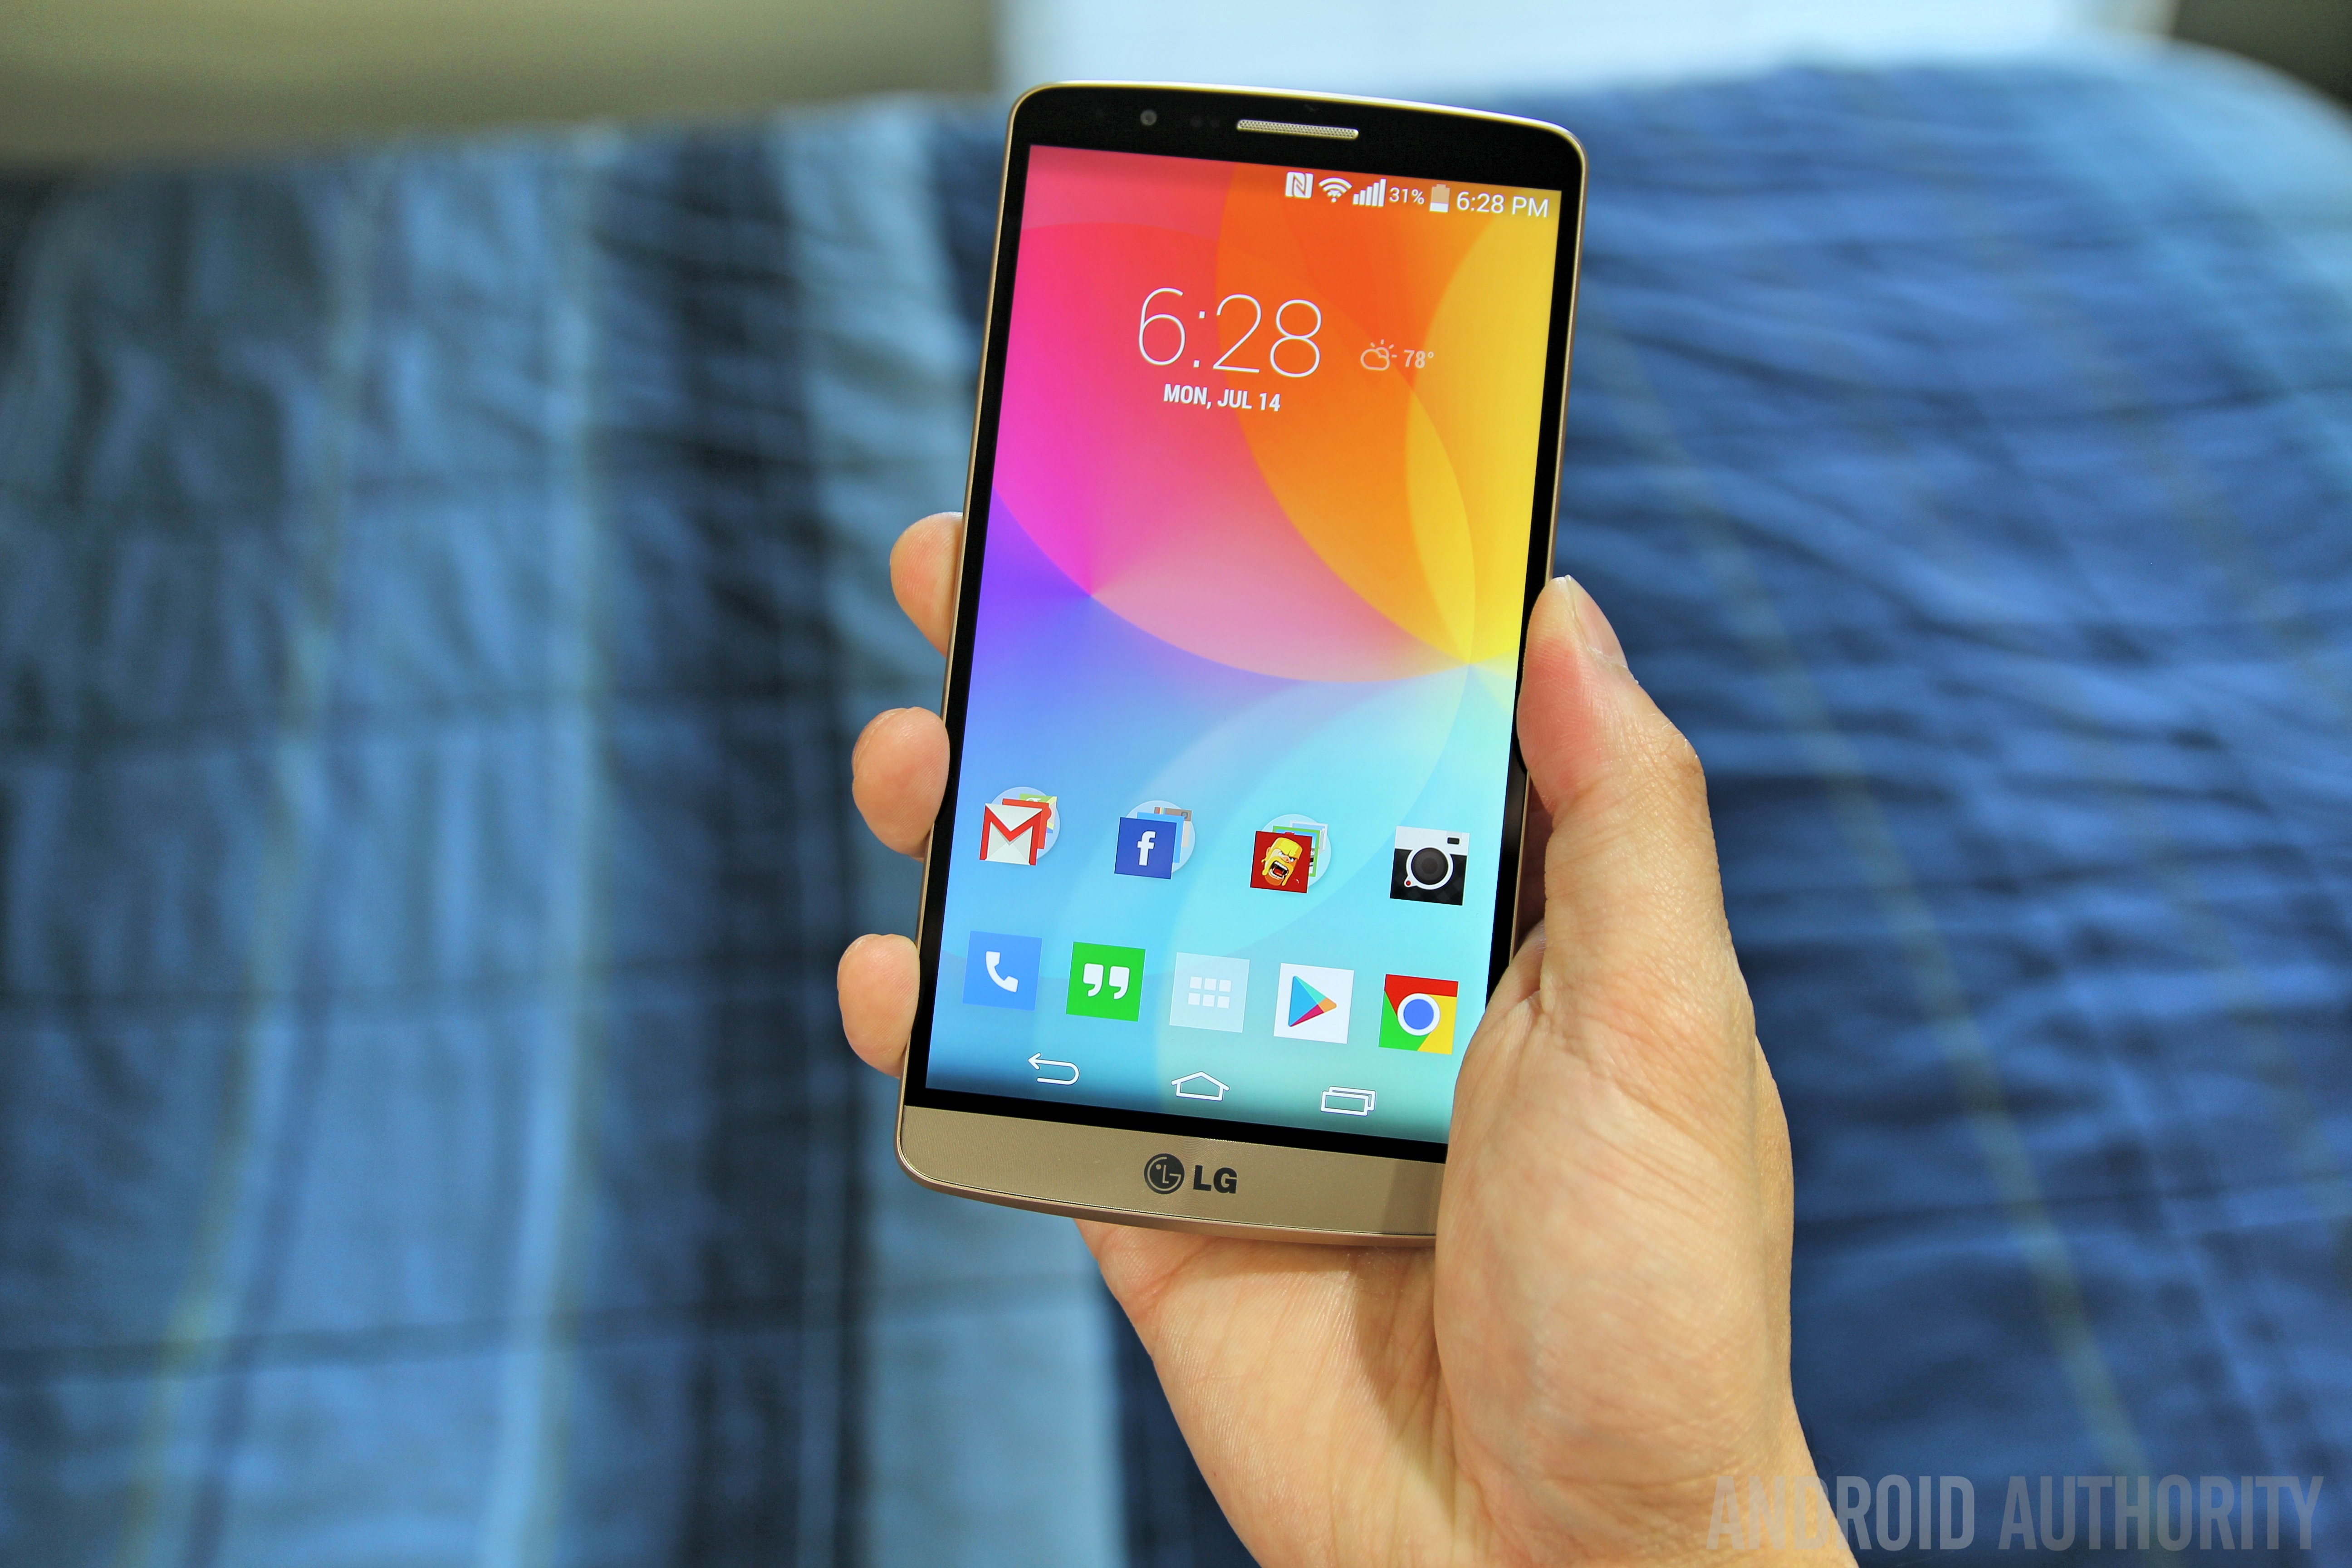 How to take a screenshot on the LG G3 - Android Authority